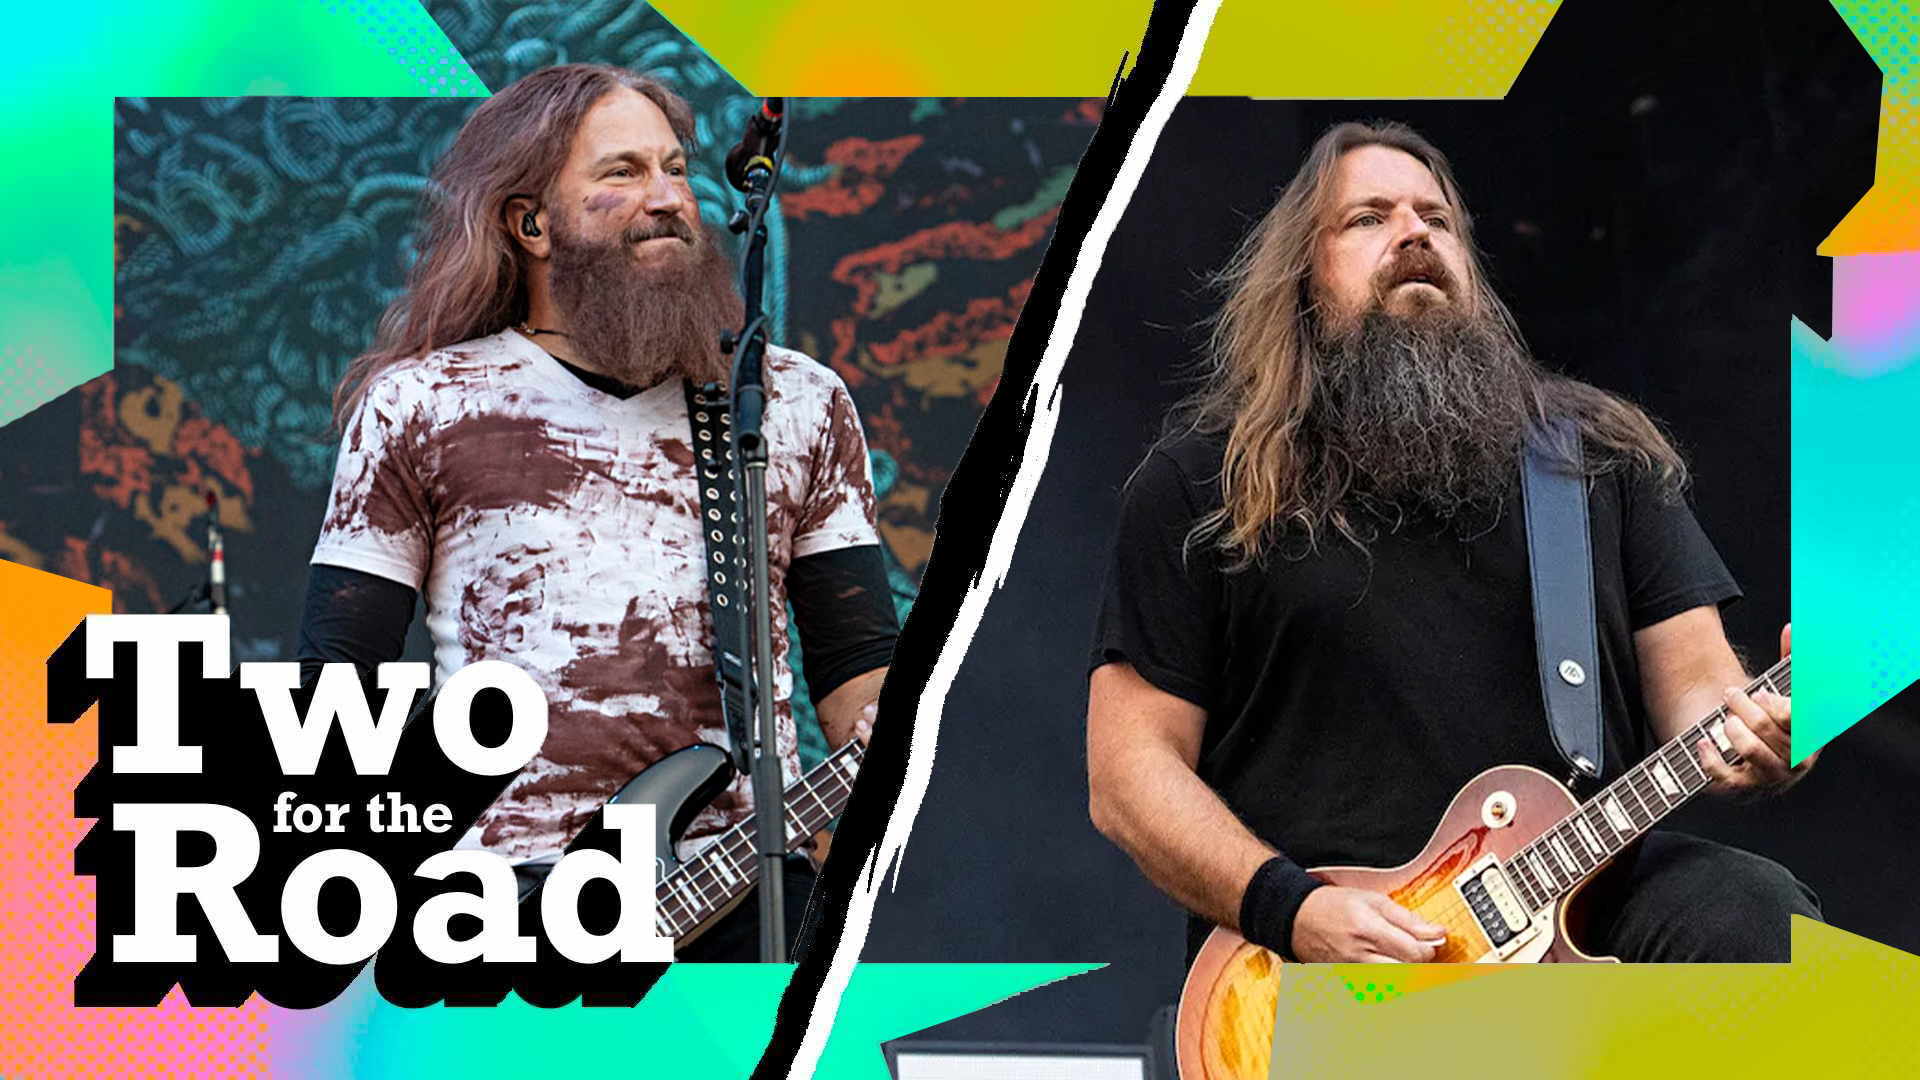 Two for Road: Mastodon and Lamb of God Talk Ashes of Leviathan Tour